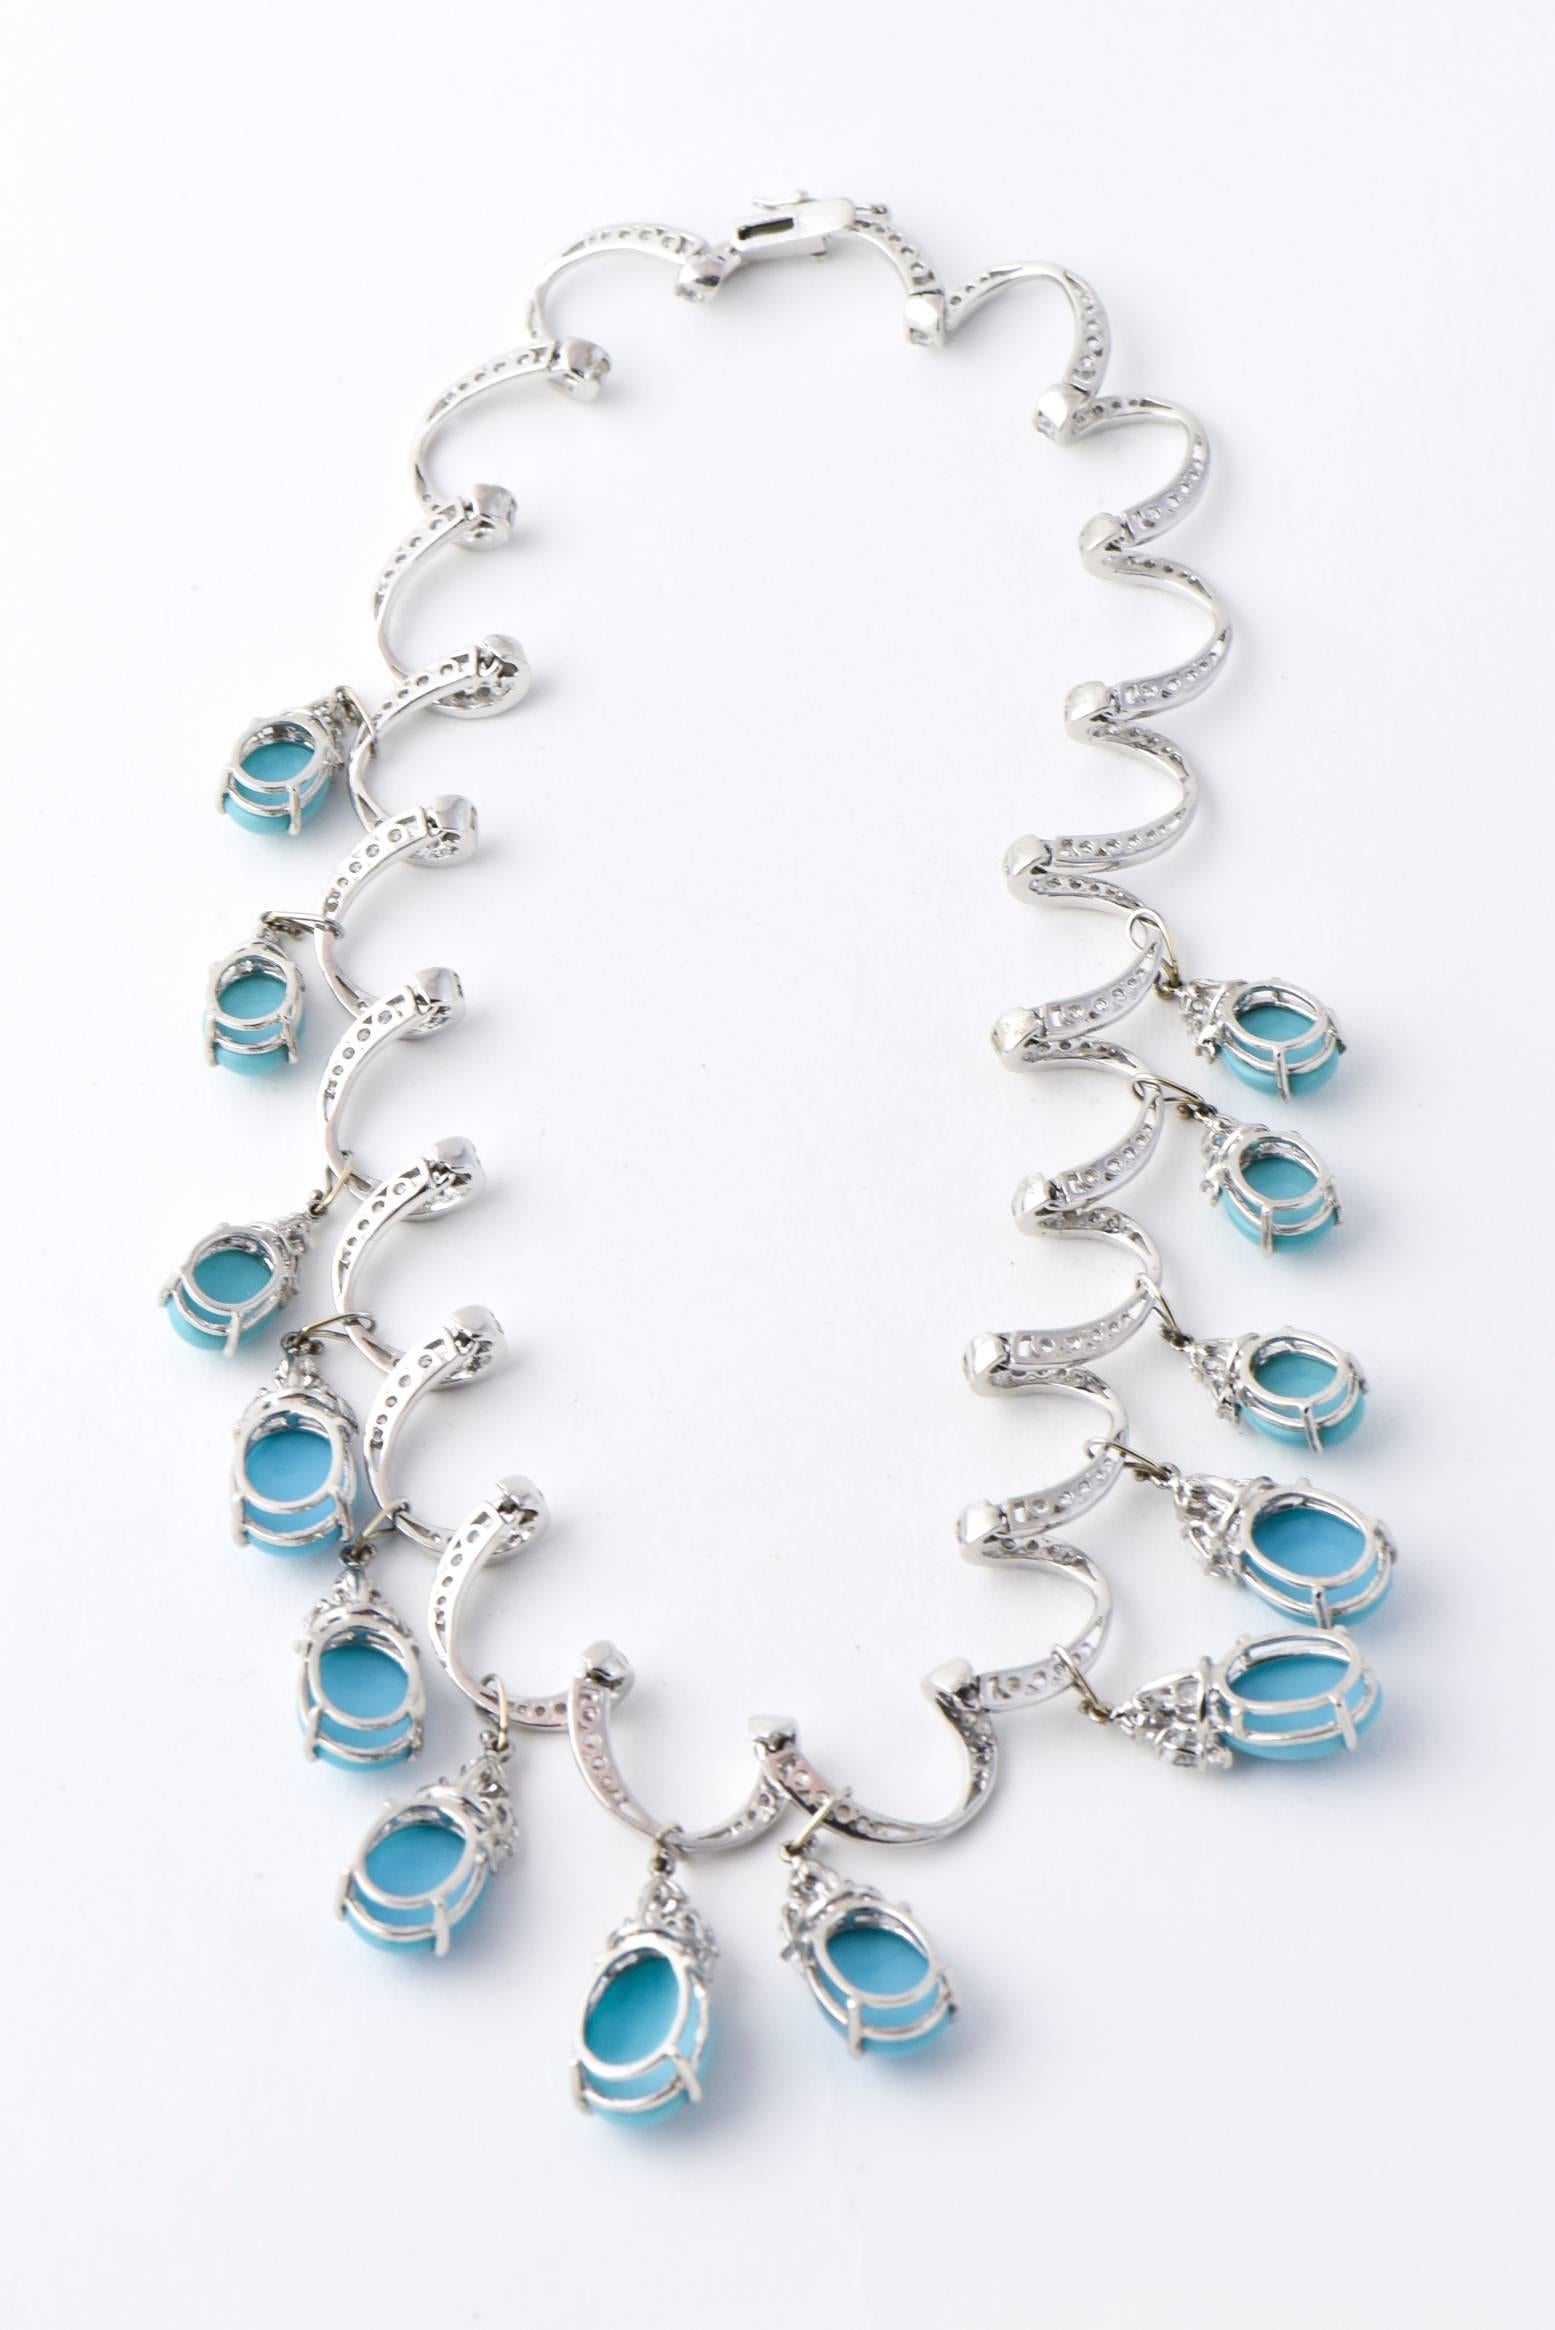 Red Carpet Glamorous Costume Diamond and Turquoise Garland Necklace 3